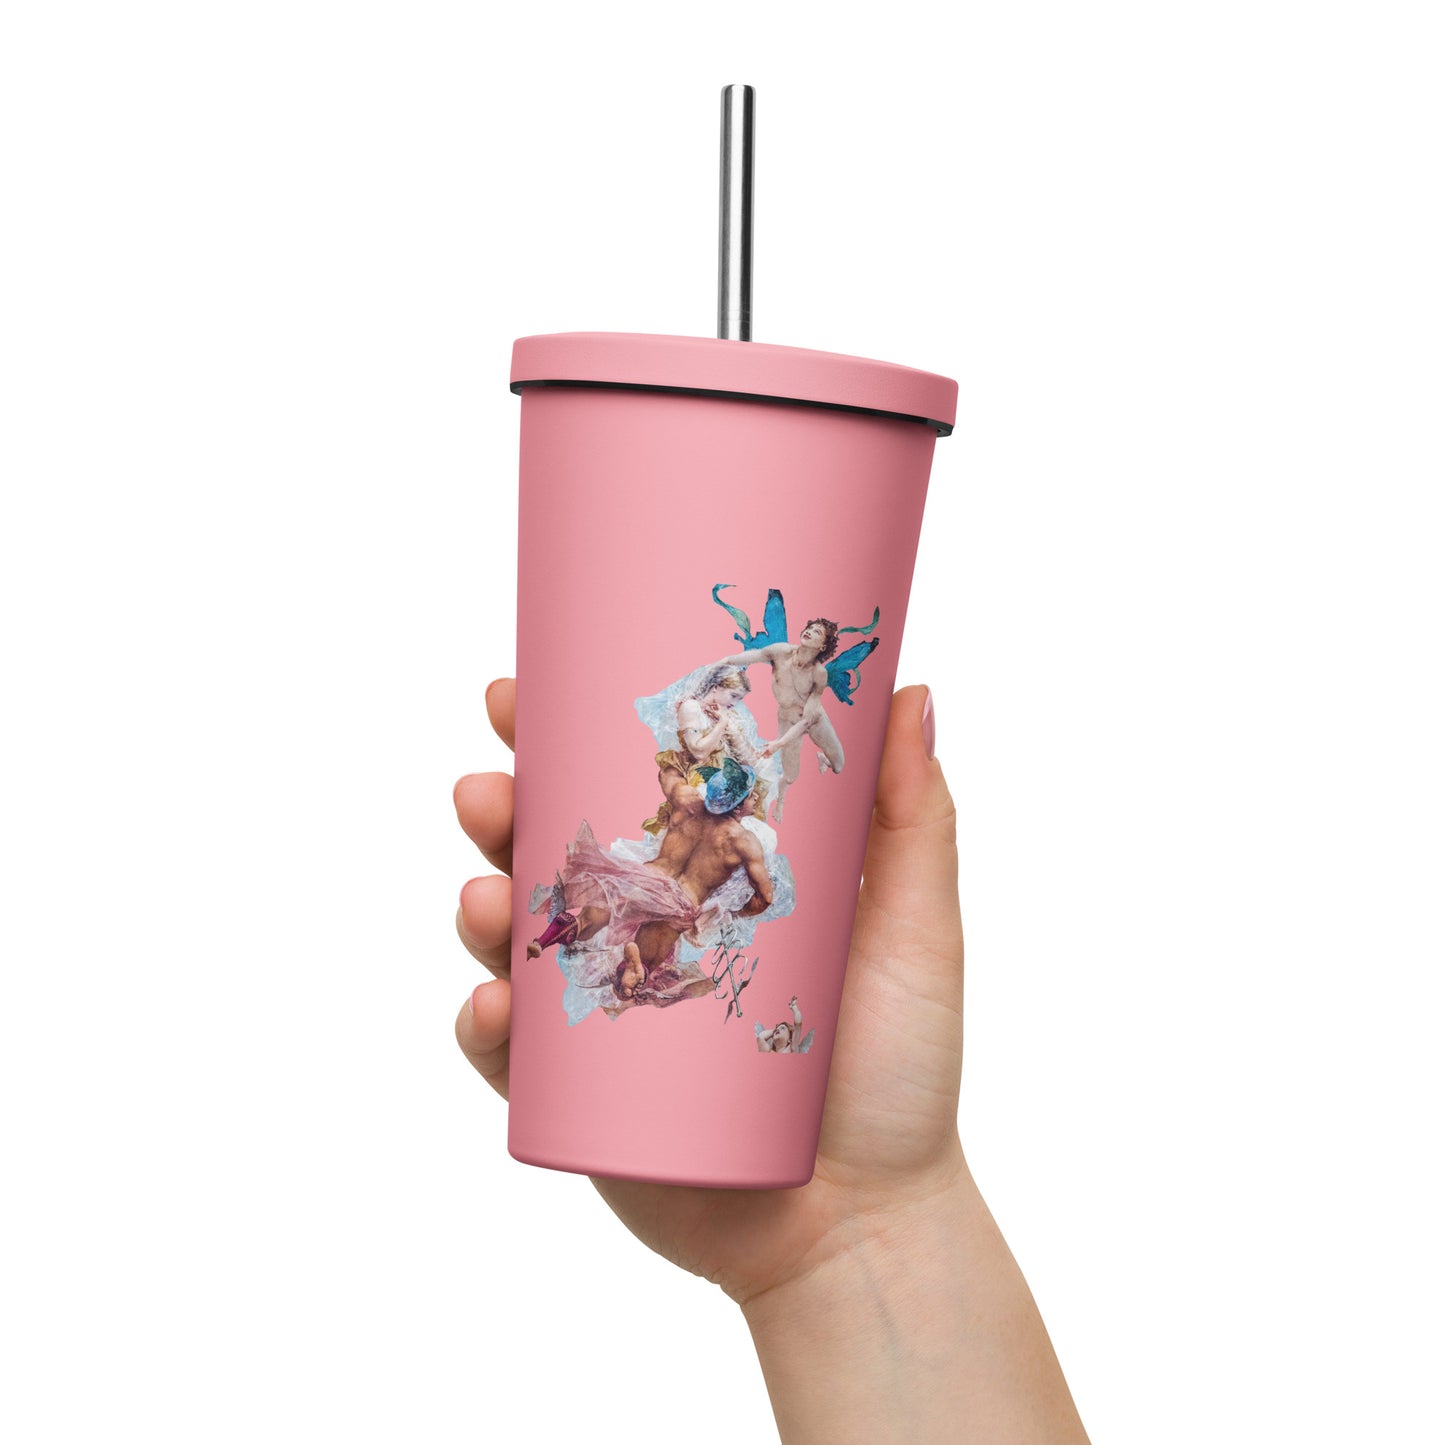 Cherubs of Chateau de Chantilly Insulated tumbler with a straw